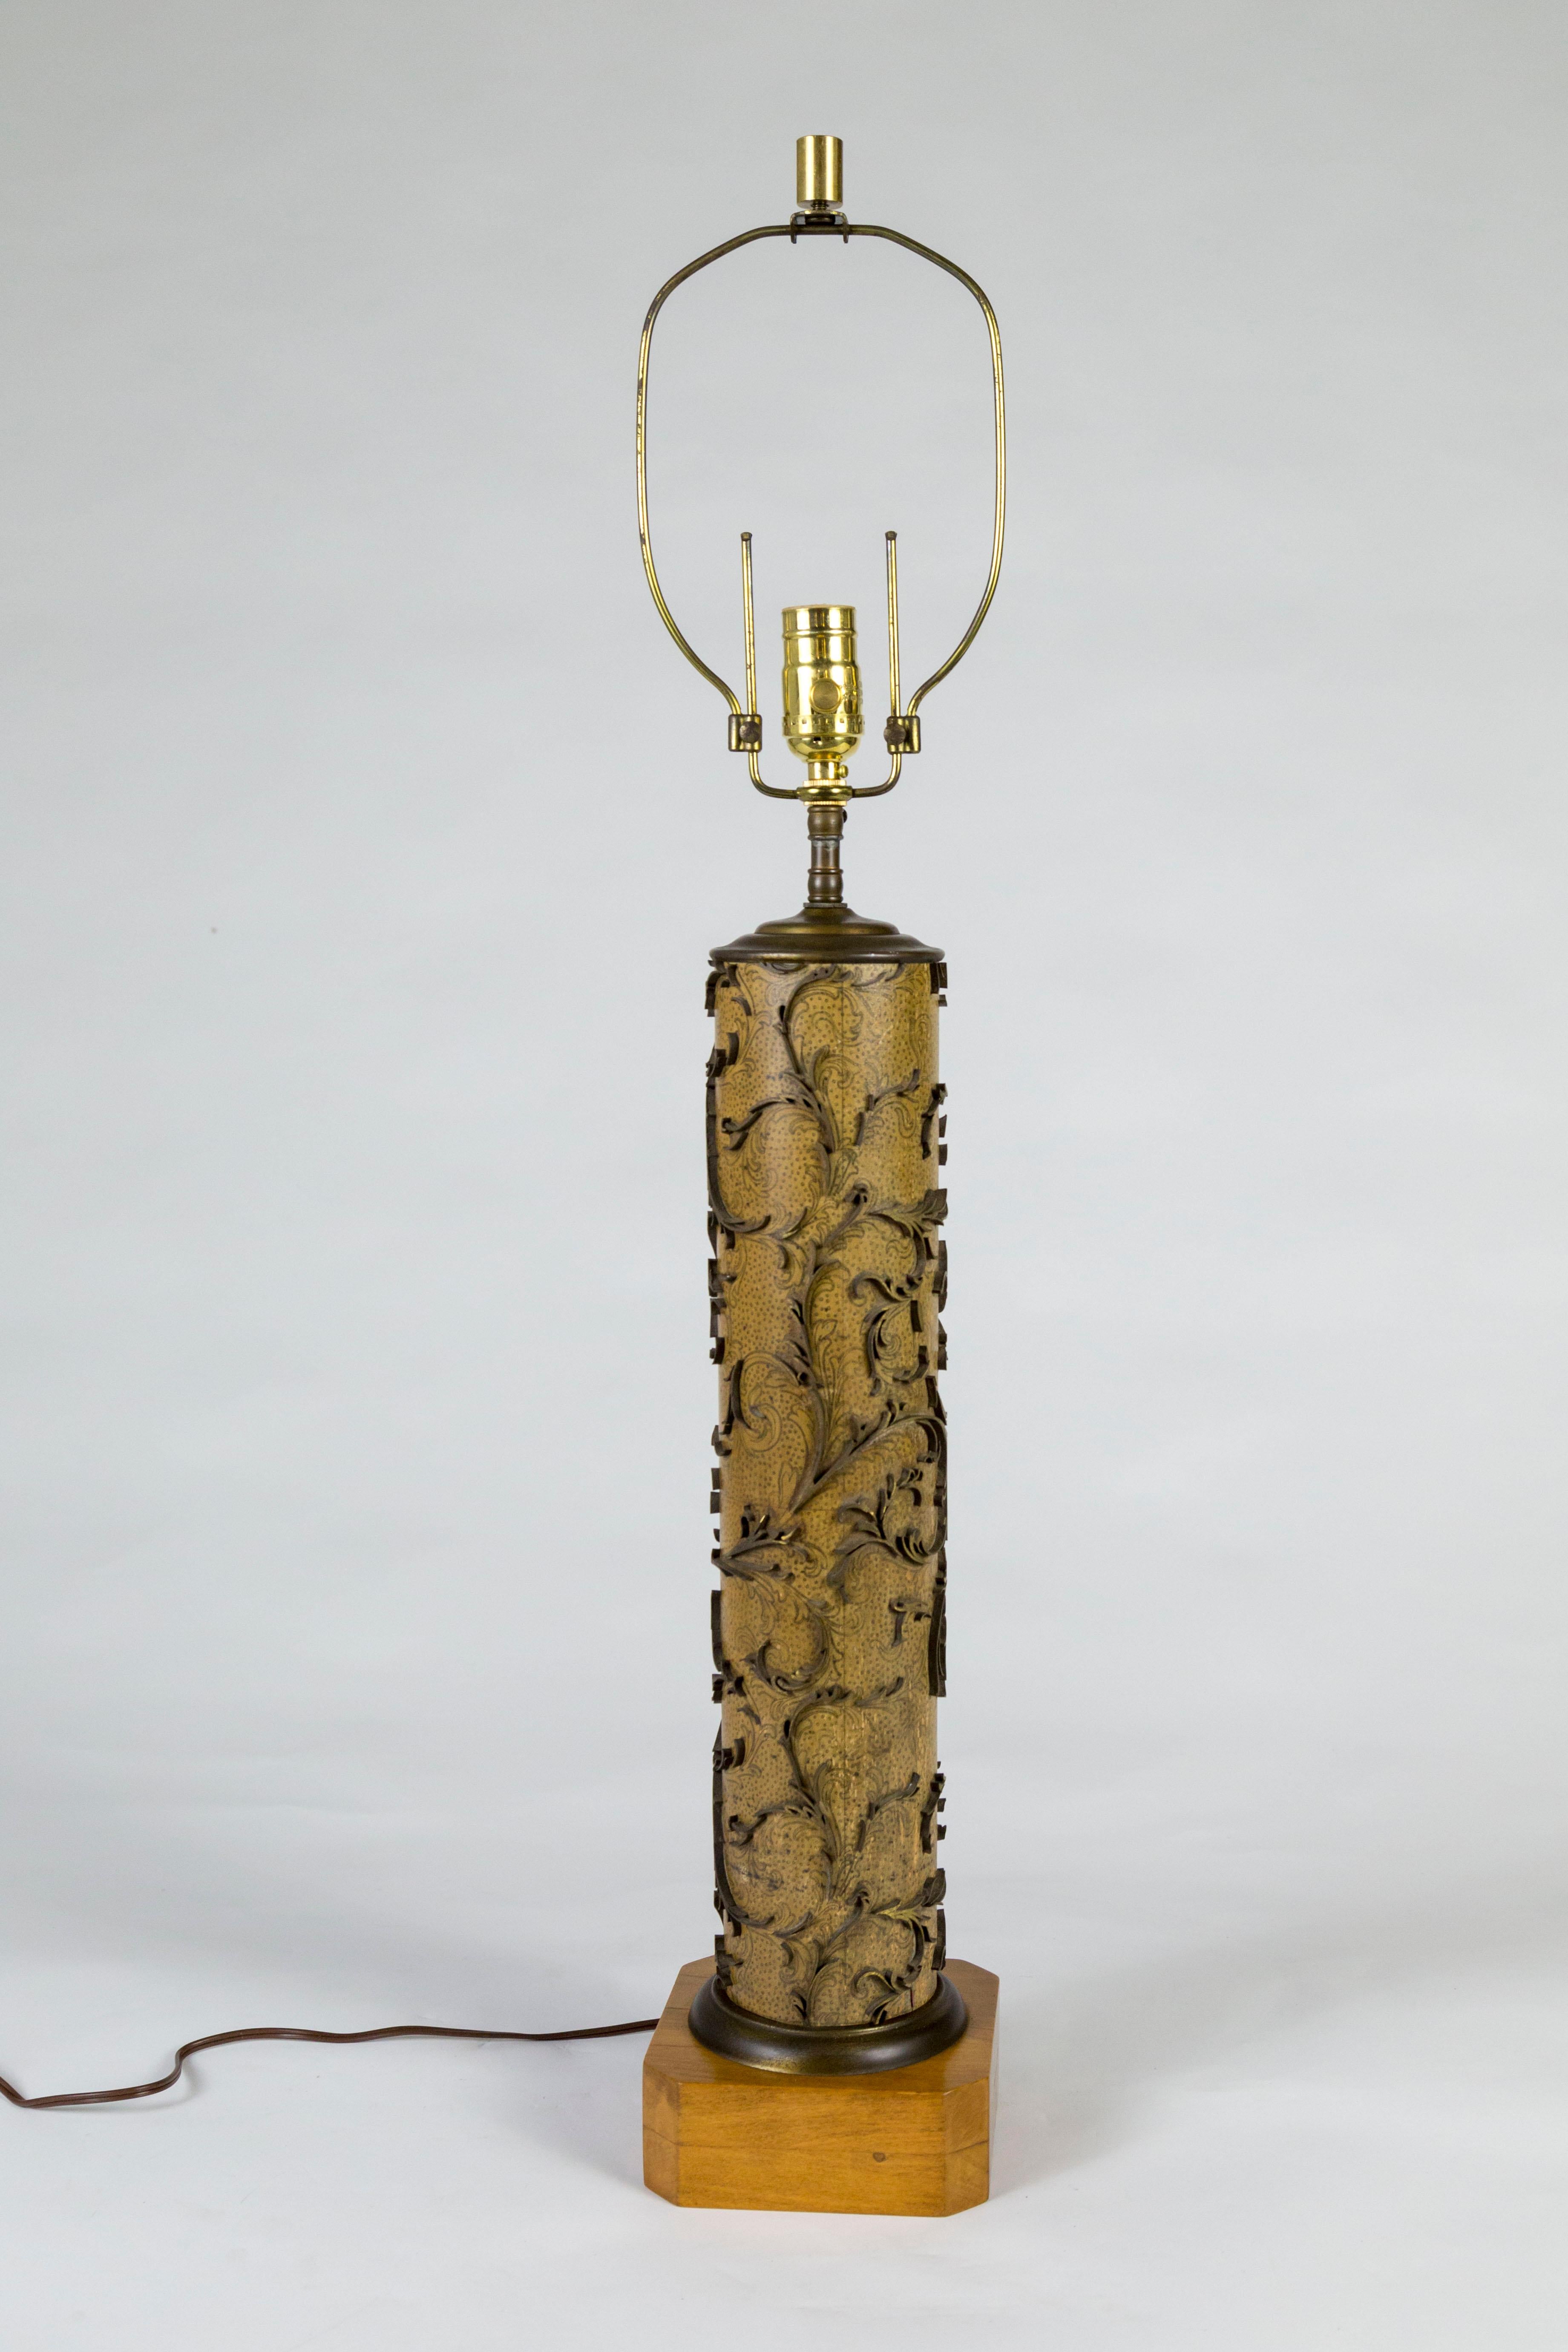 A lamp made from a vintage roller for printing wallpaper. The imprinting elements are brass swirling leaves; mounted on a square, wooden base; adjustable harp, newly wired with a dimmer on the socket. Measures 6